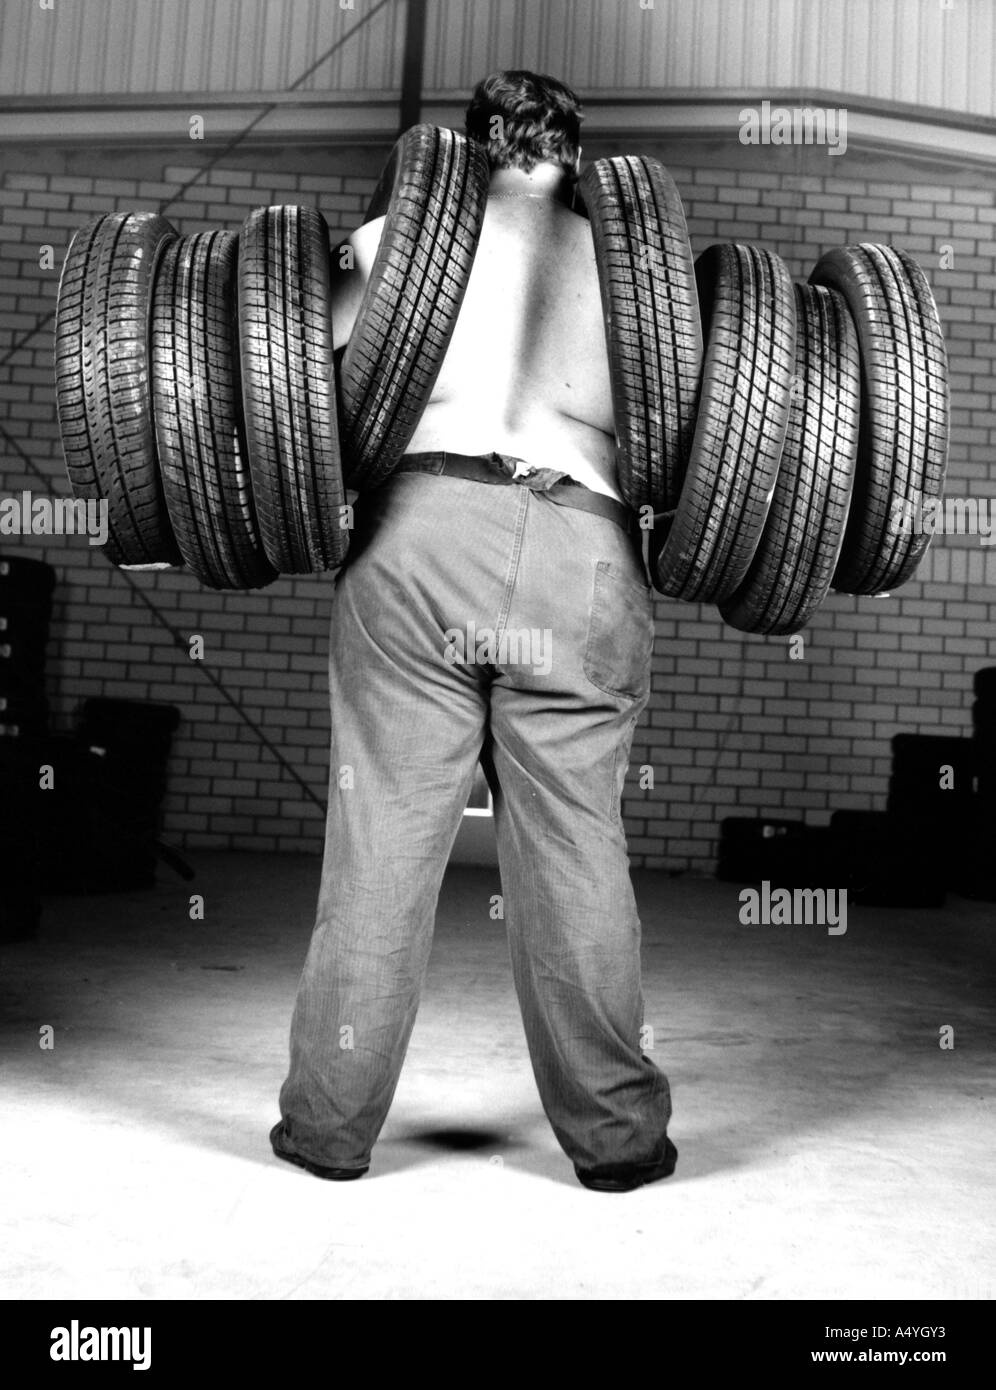 Man carrying 8 tyres Stock Photo